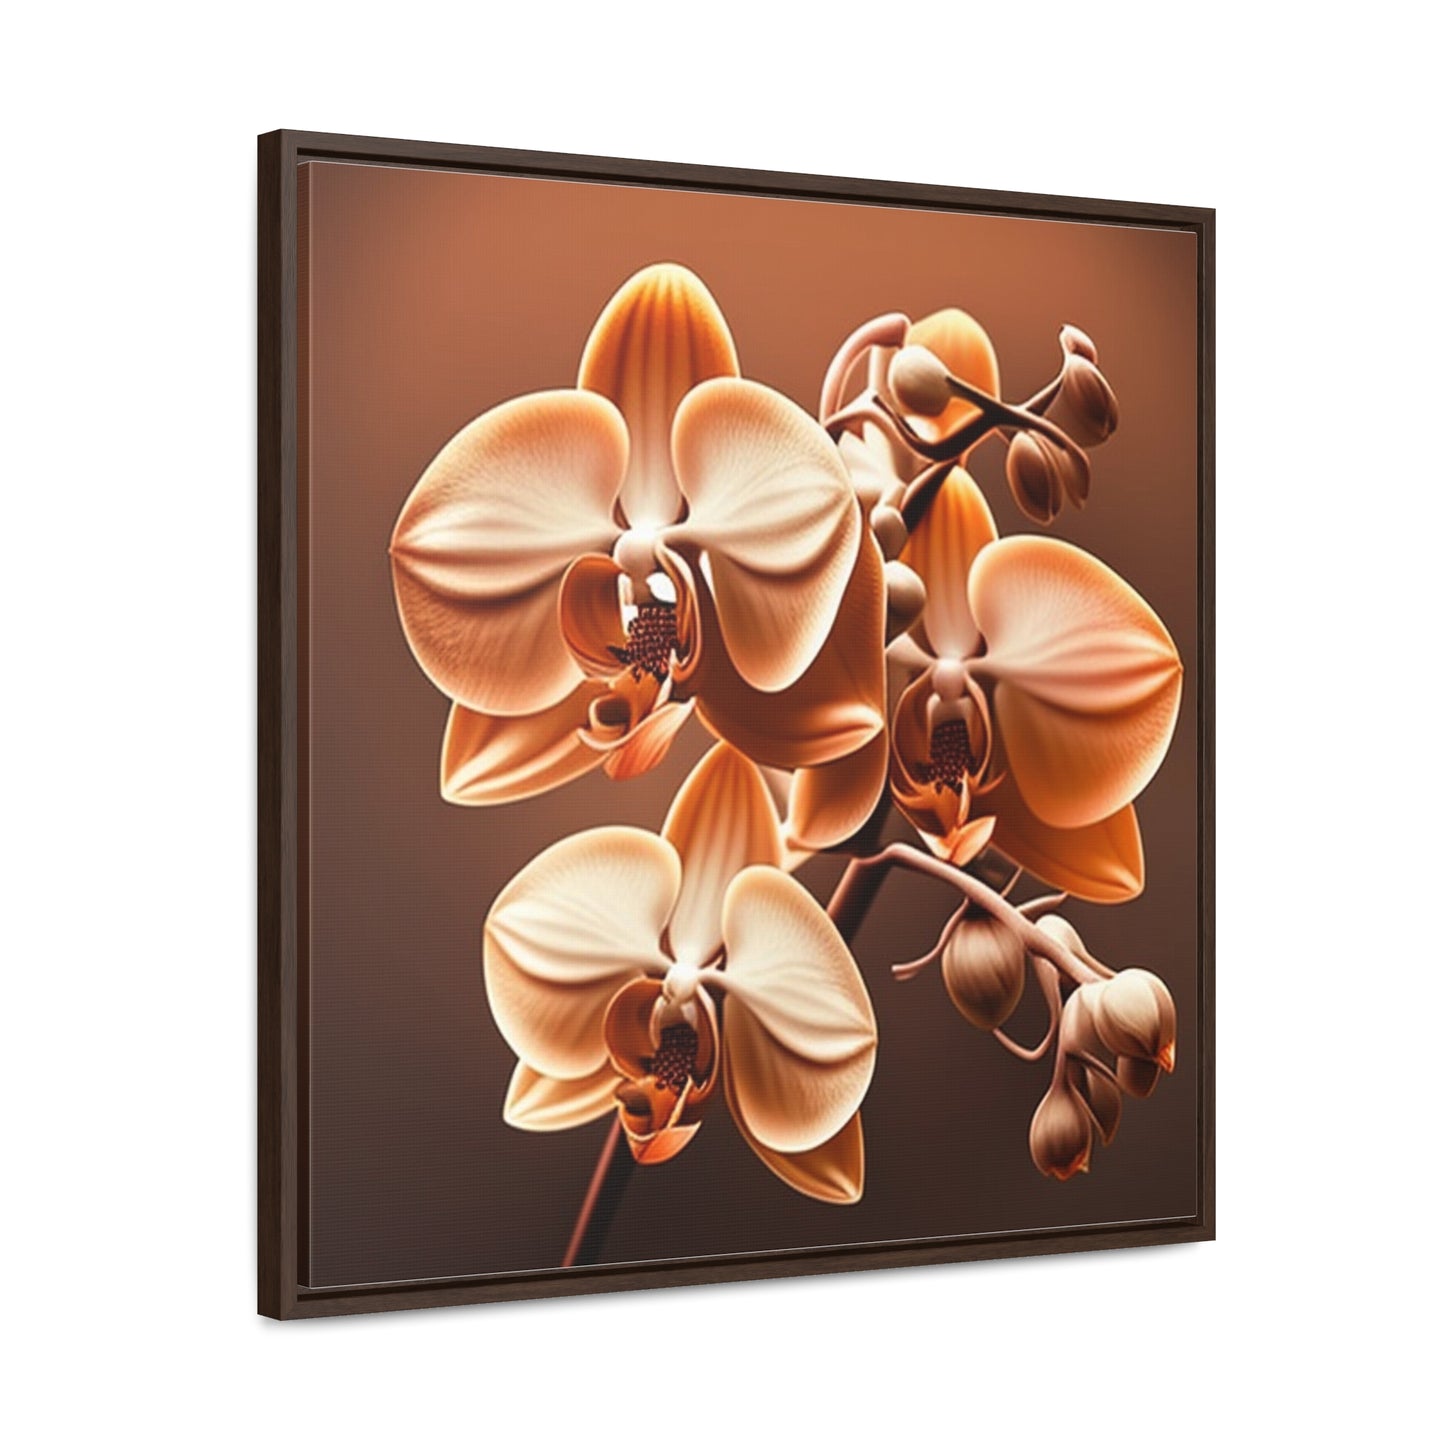 Gallery Canvas Wraps, Square Frame orchid pedals 3